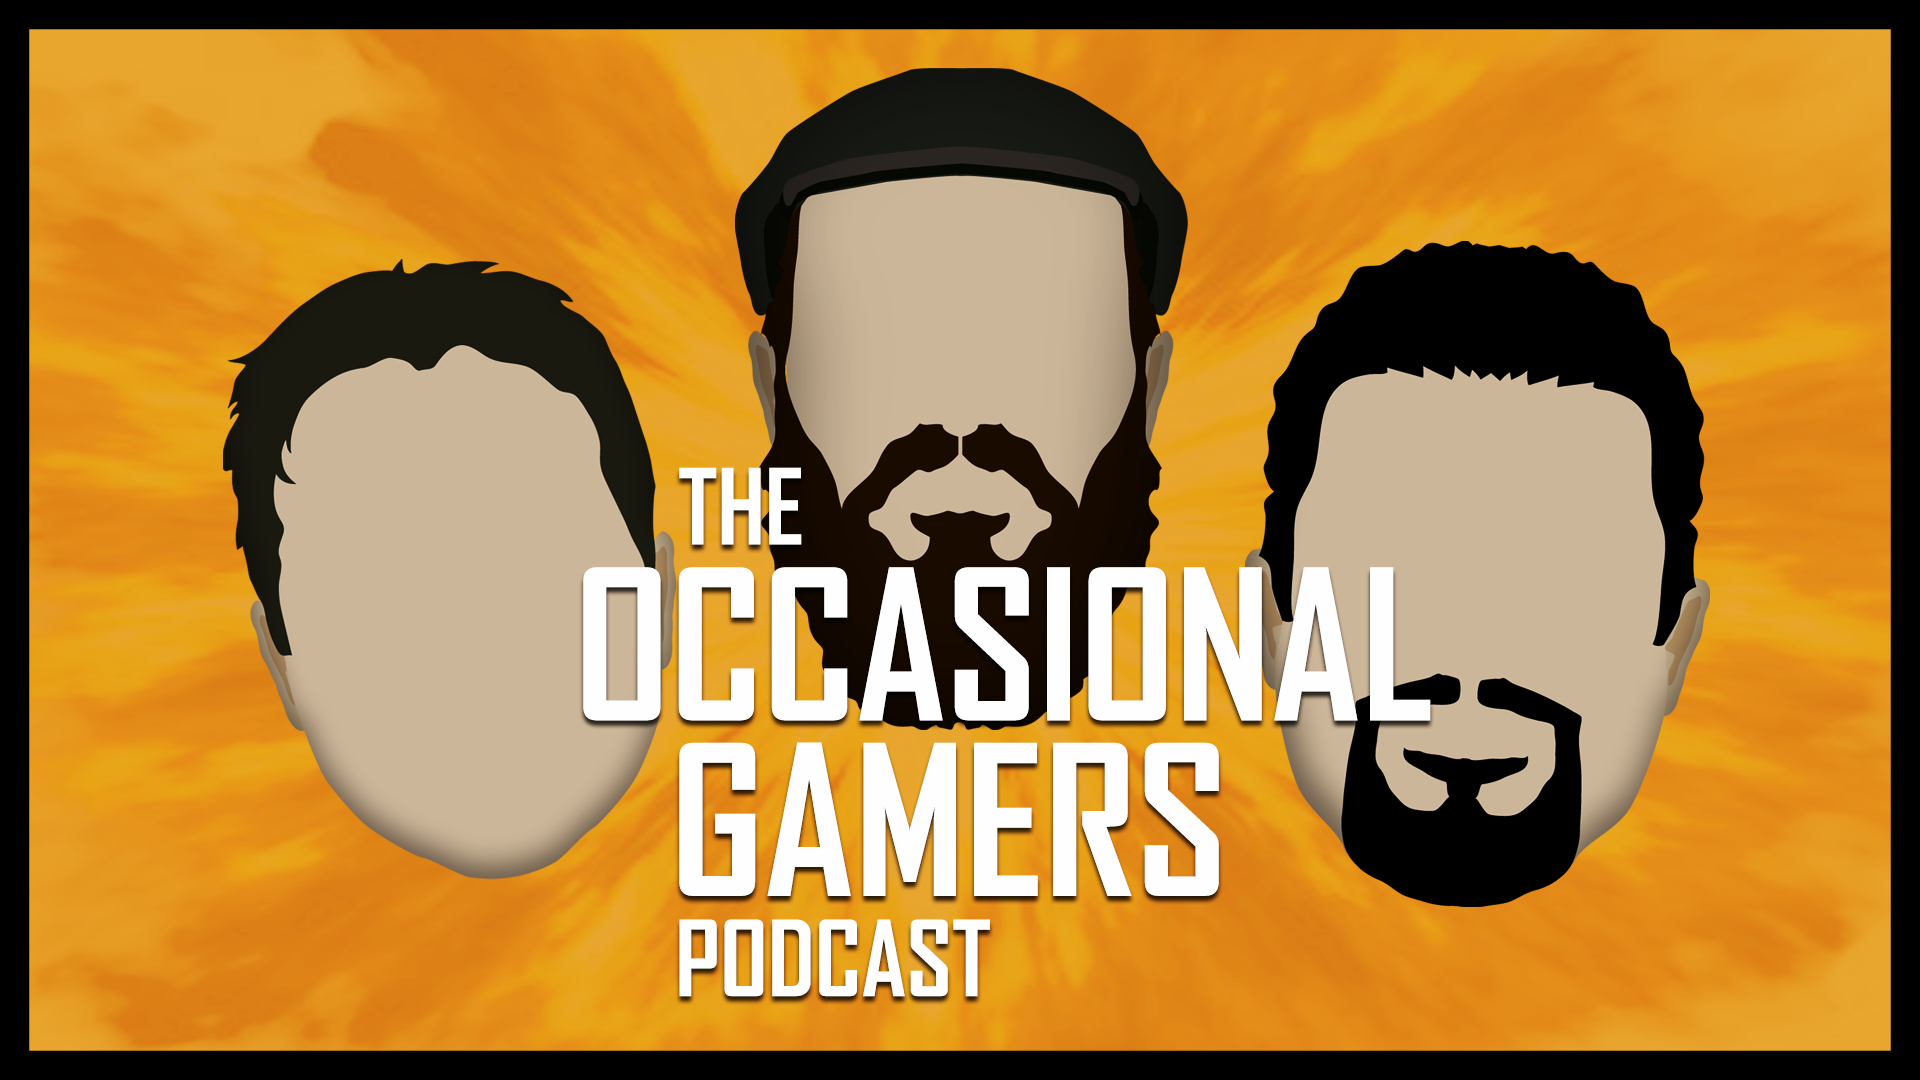 THe Occasional Gamer's Podcast Episode 006: Blizzard Busts Out The Banhammer